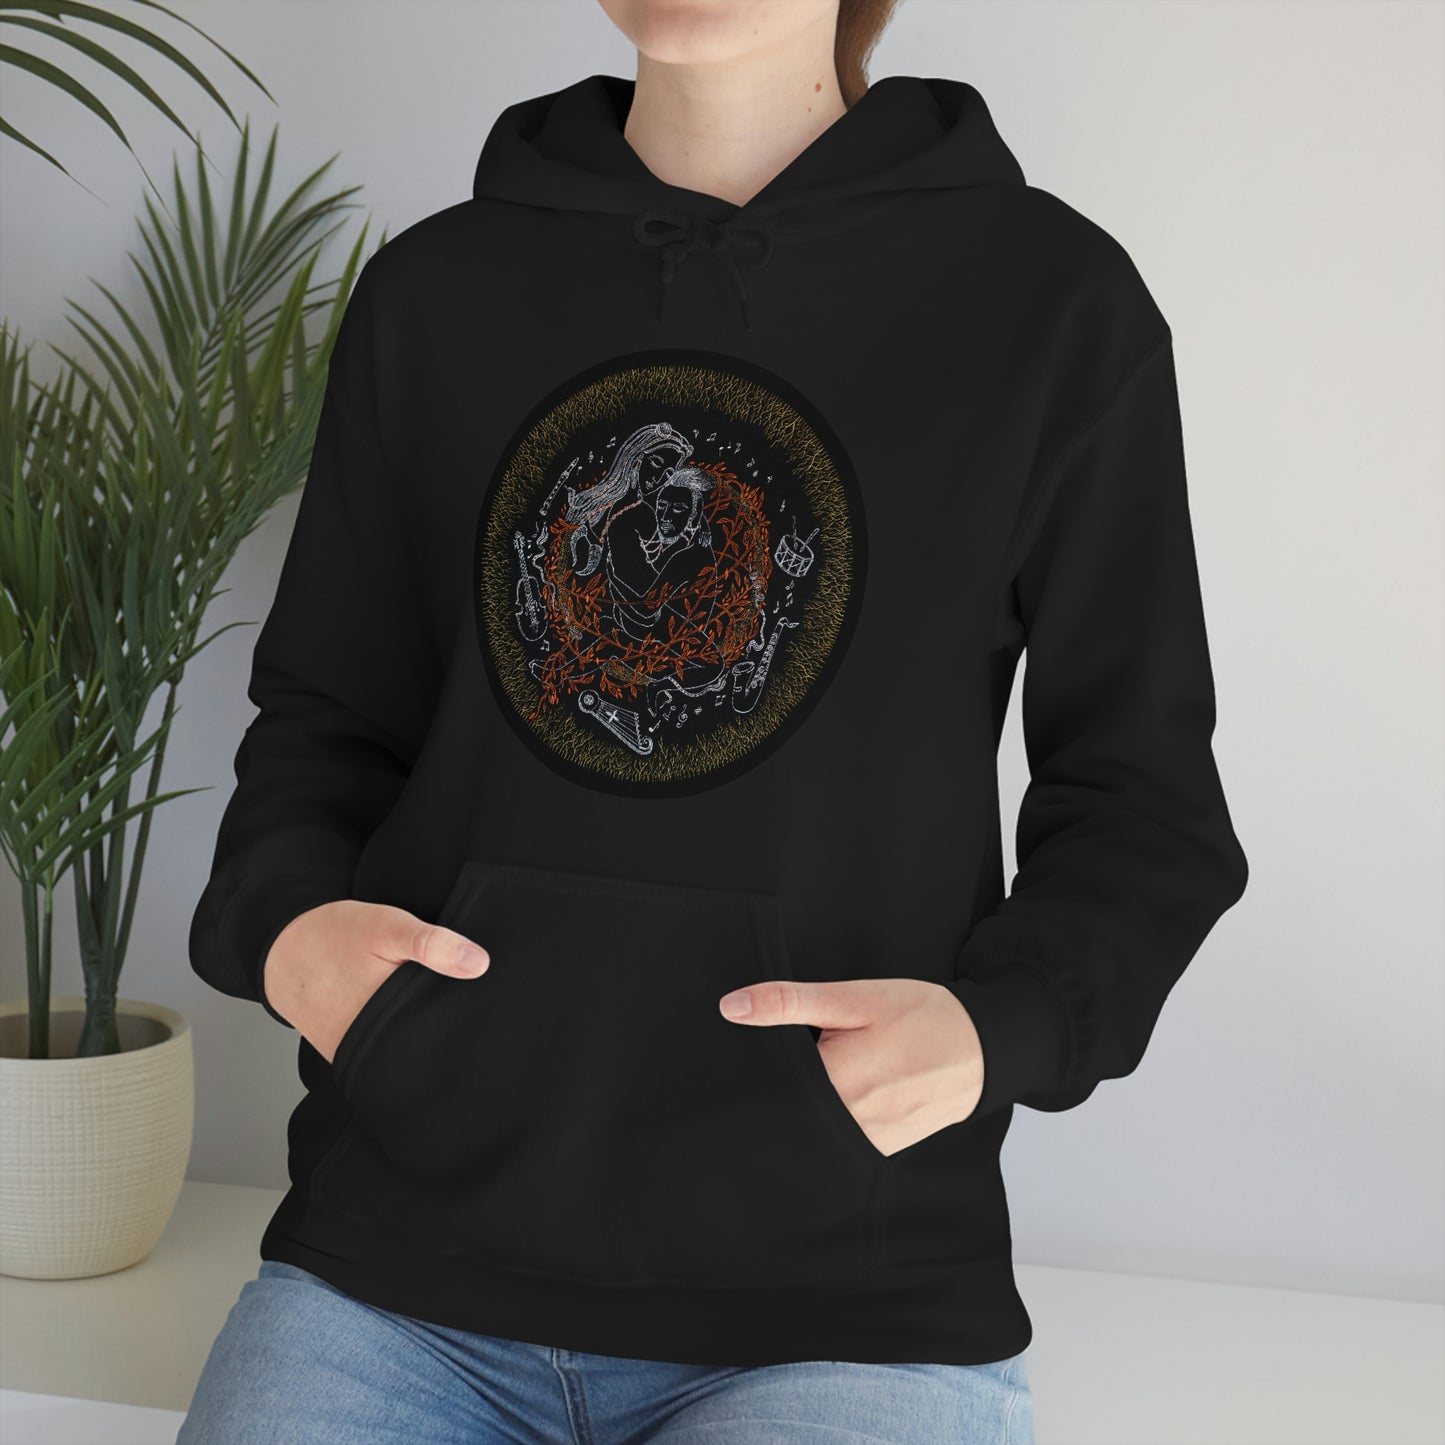 Chinese Zodiac Sign Hoodie (Ox)